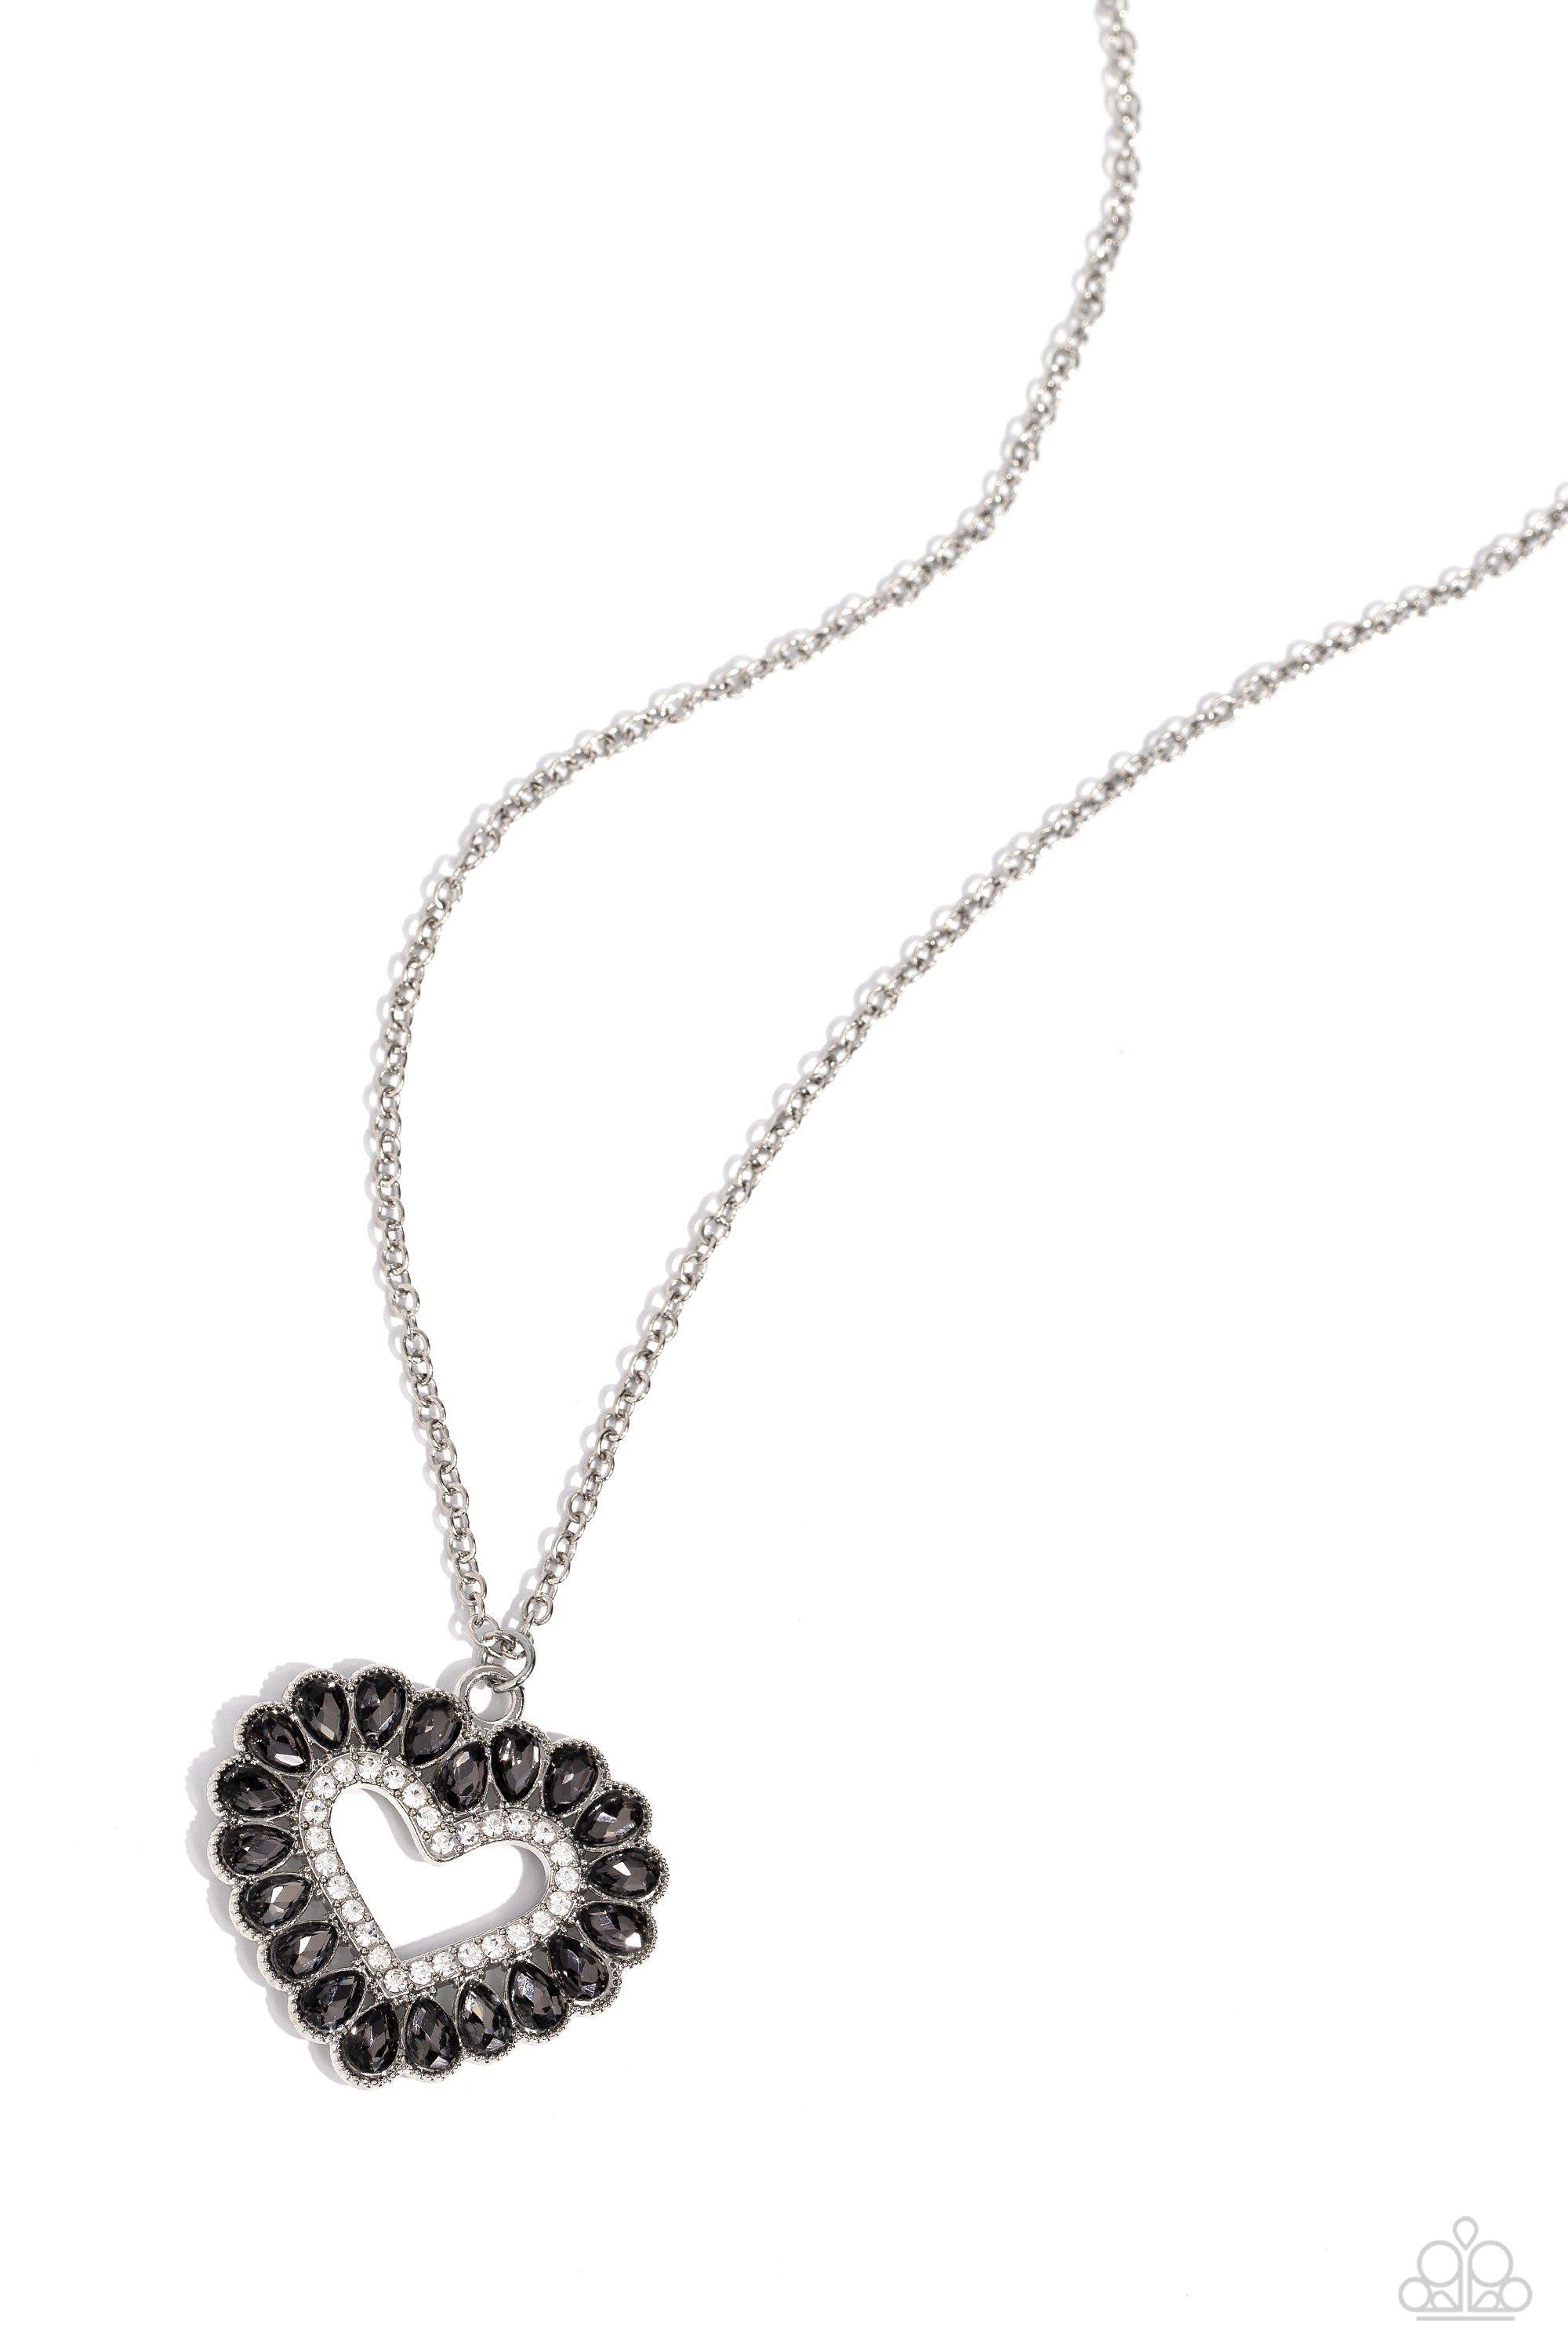 FLIRT No More Silver & White Rhinestone Heart Necklace - Paparazzi Accessories- lightbox - CarasShop.com - $5 Jewelry by Cara Jewels